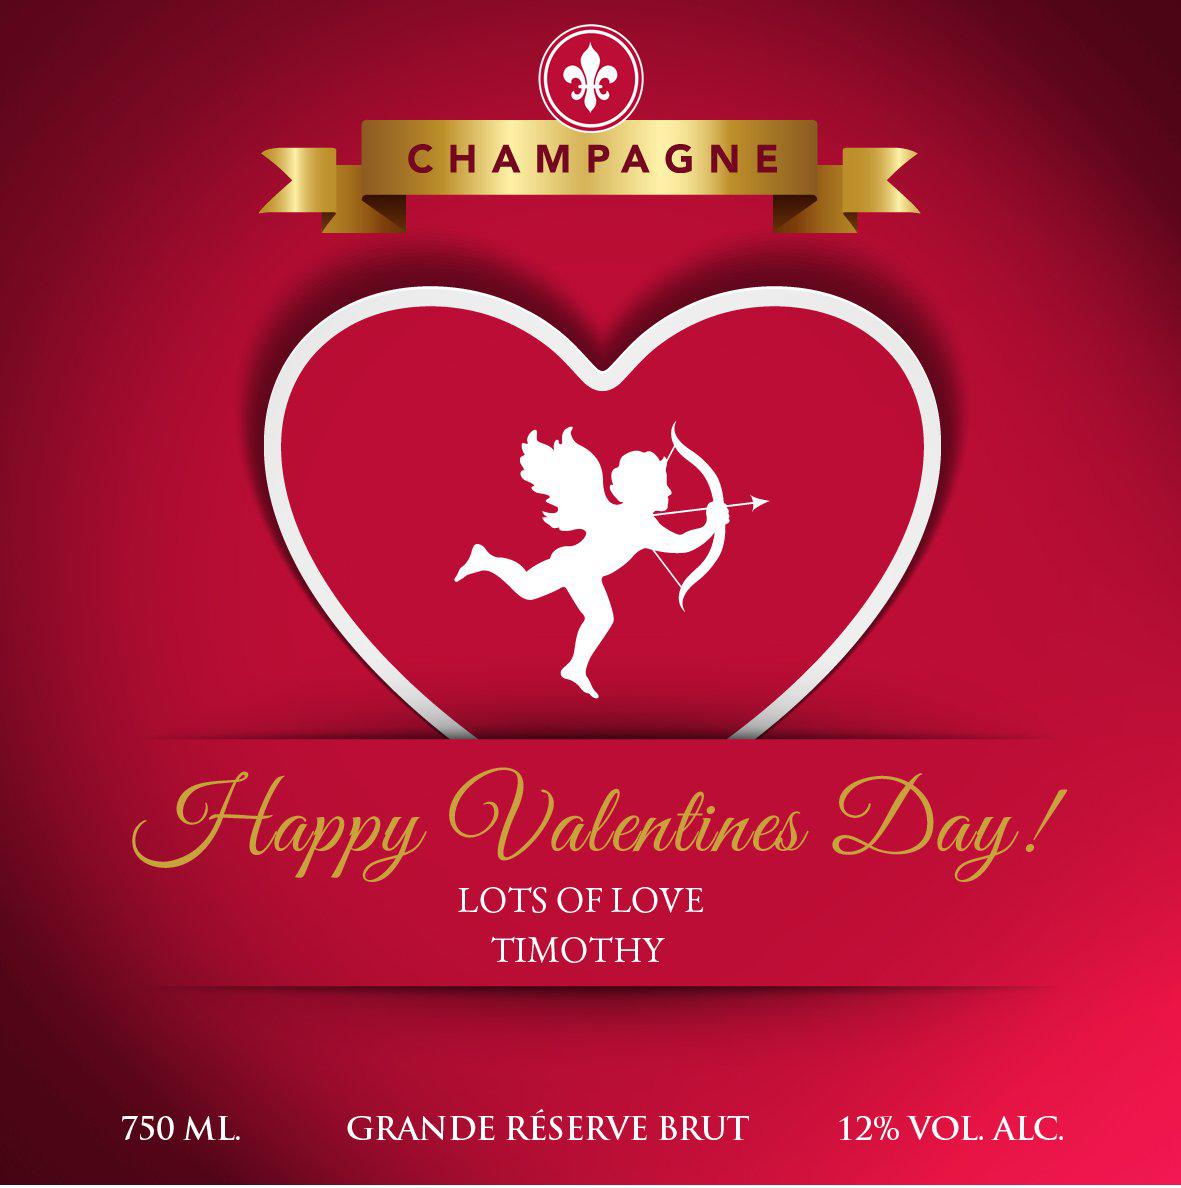 75 Happy Valentine's Day Wishes and Messages